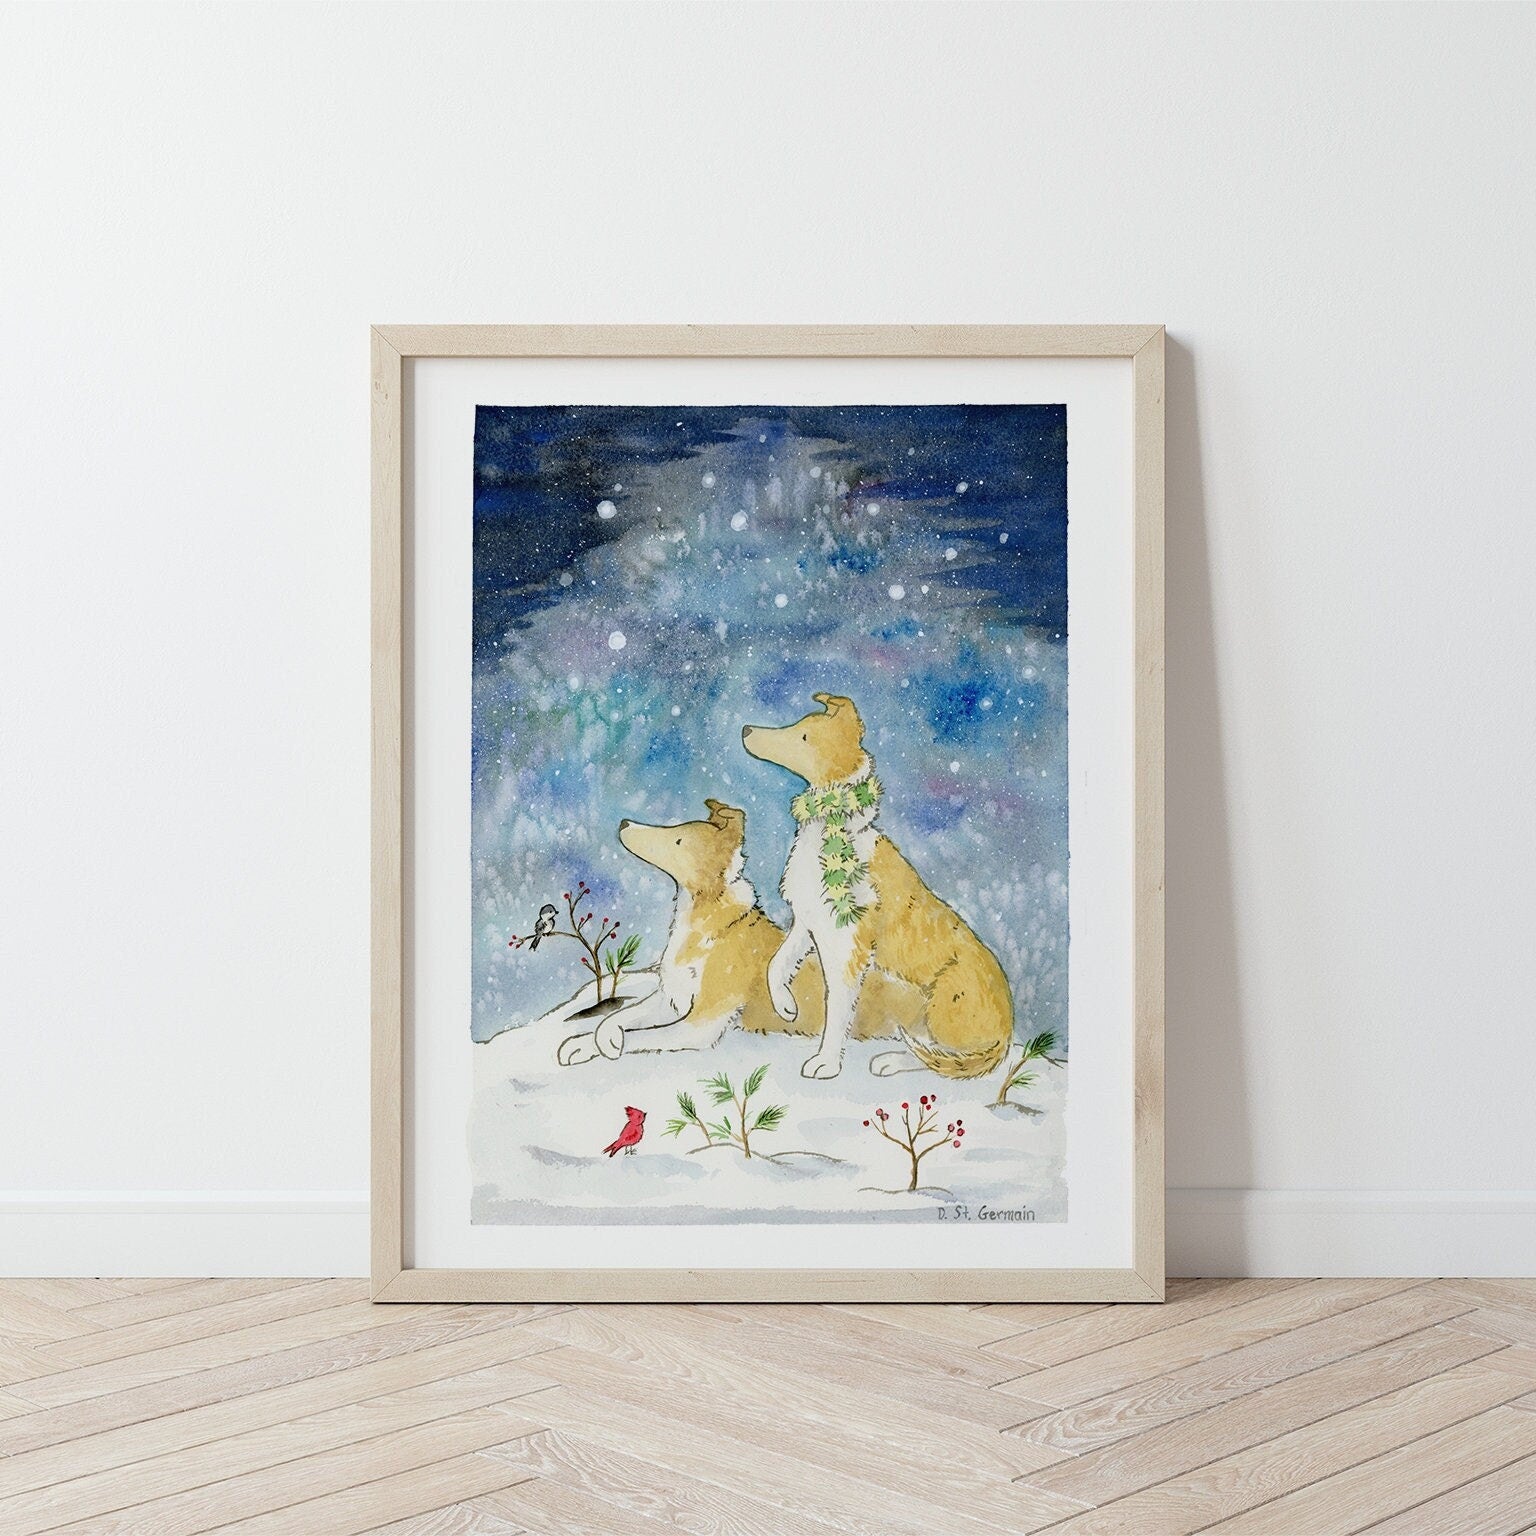 Framed watercolor art print with two smooth collies and a winter snowy night scene.